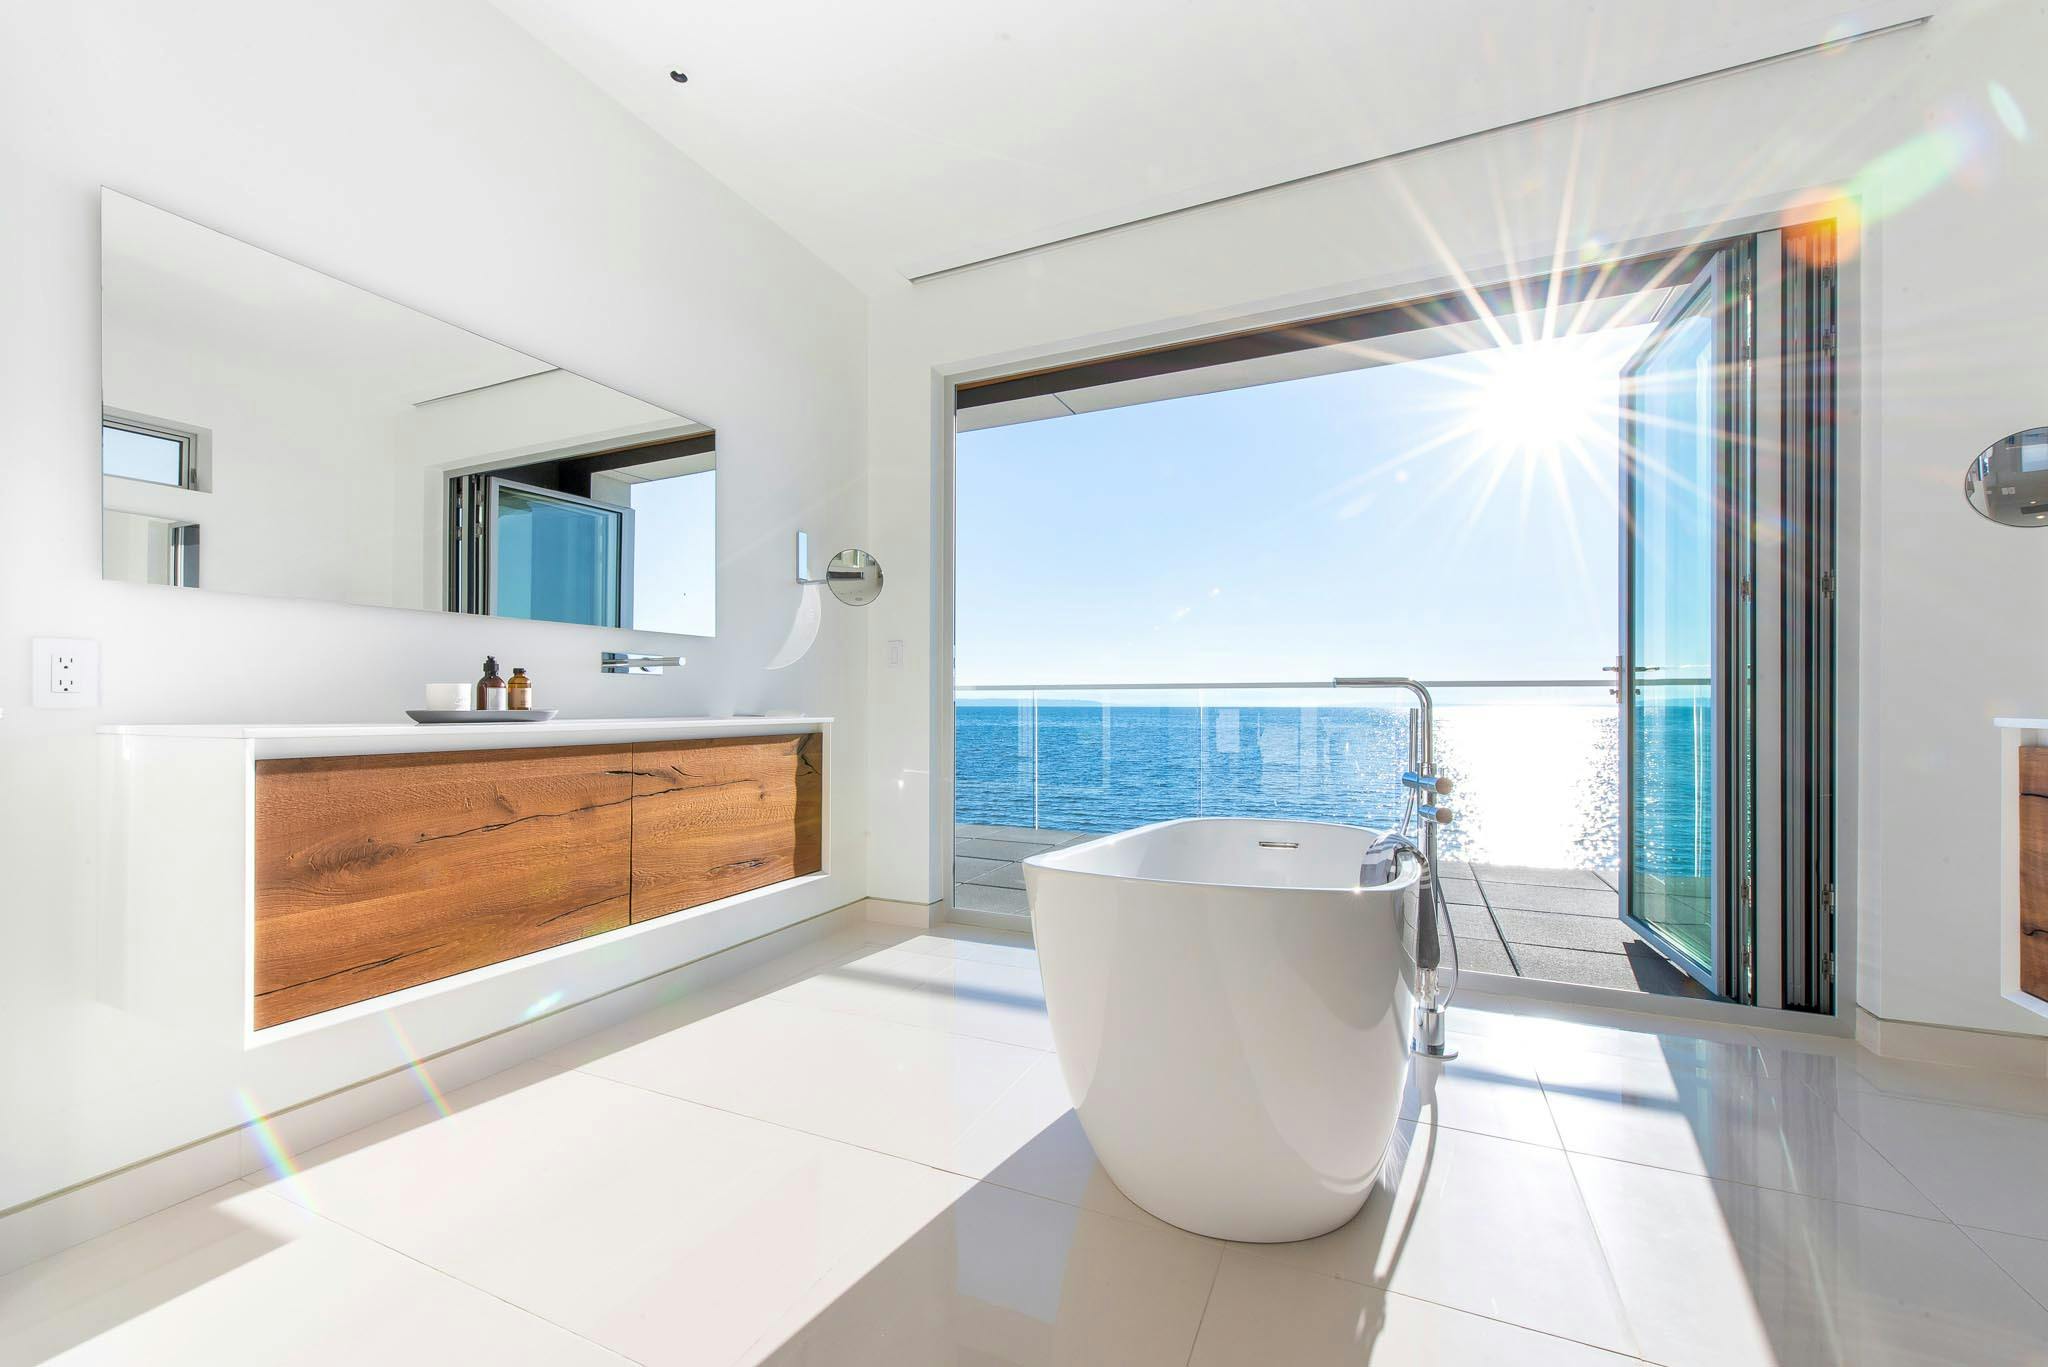 freestanding bathtub in front of open folding glass wall in oceanfront home